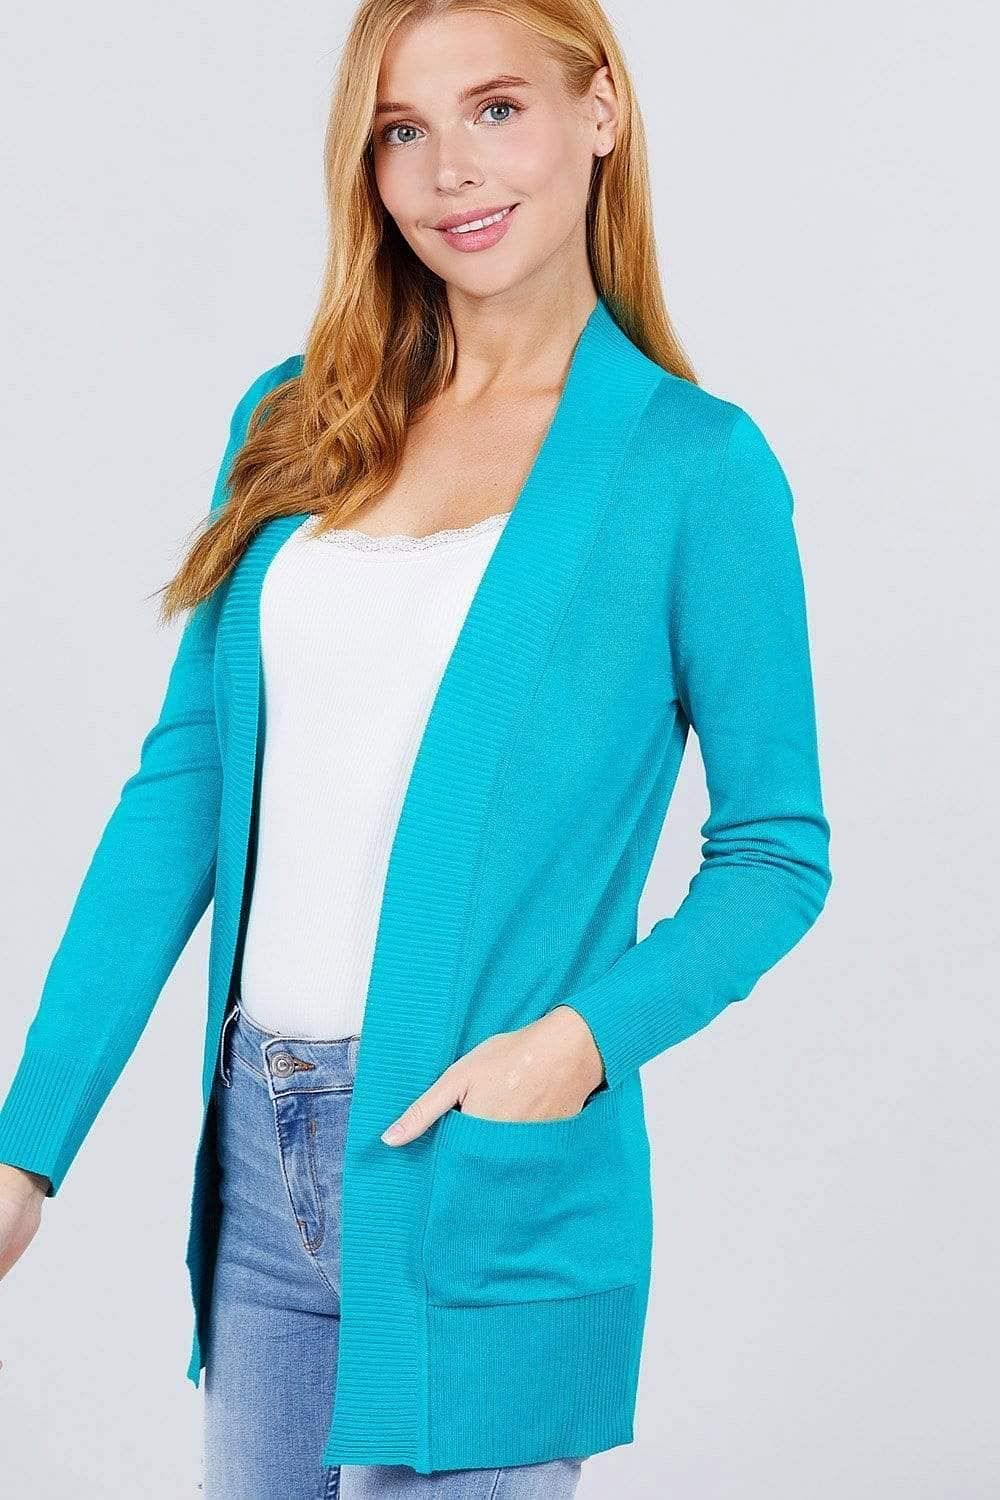 Turquoise Long Sleeve Open-Front Rib Knit Cardigan - Shopping Therapy, LLC Cardigan